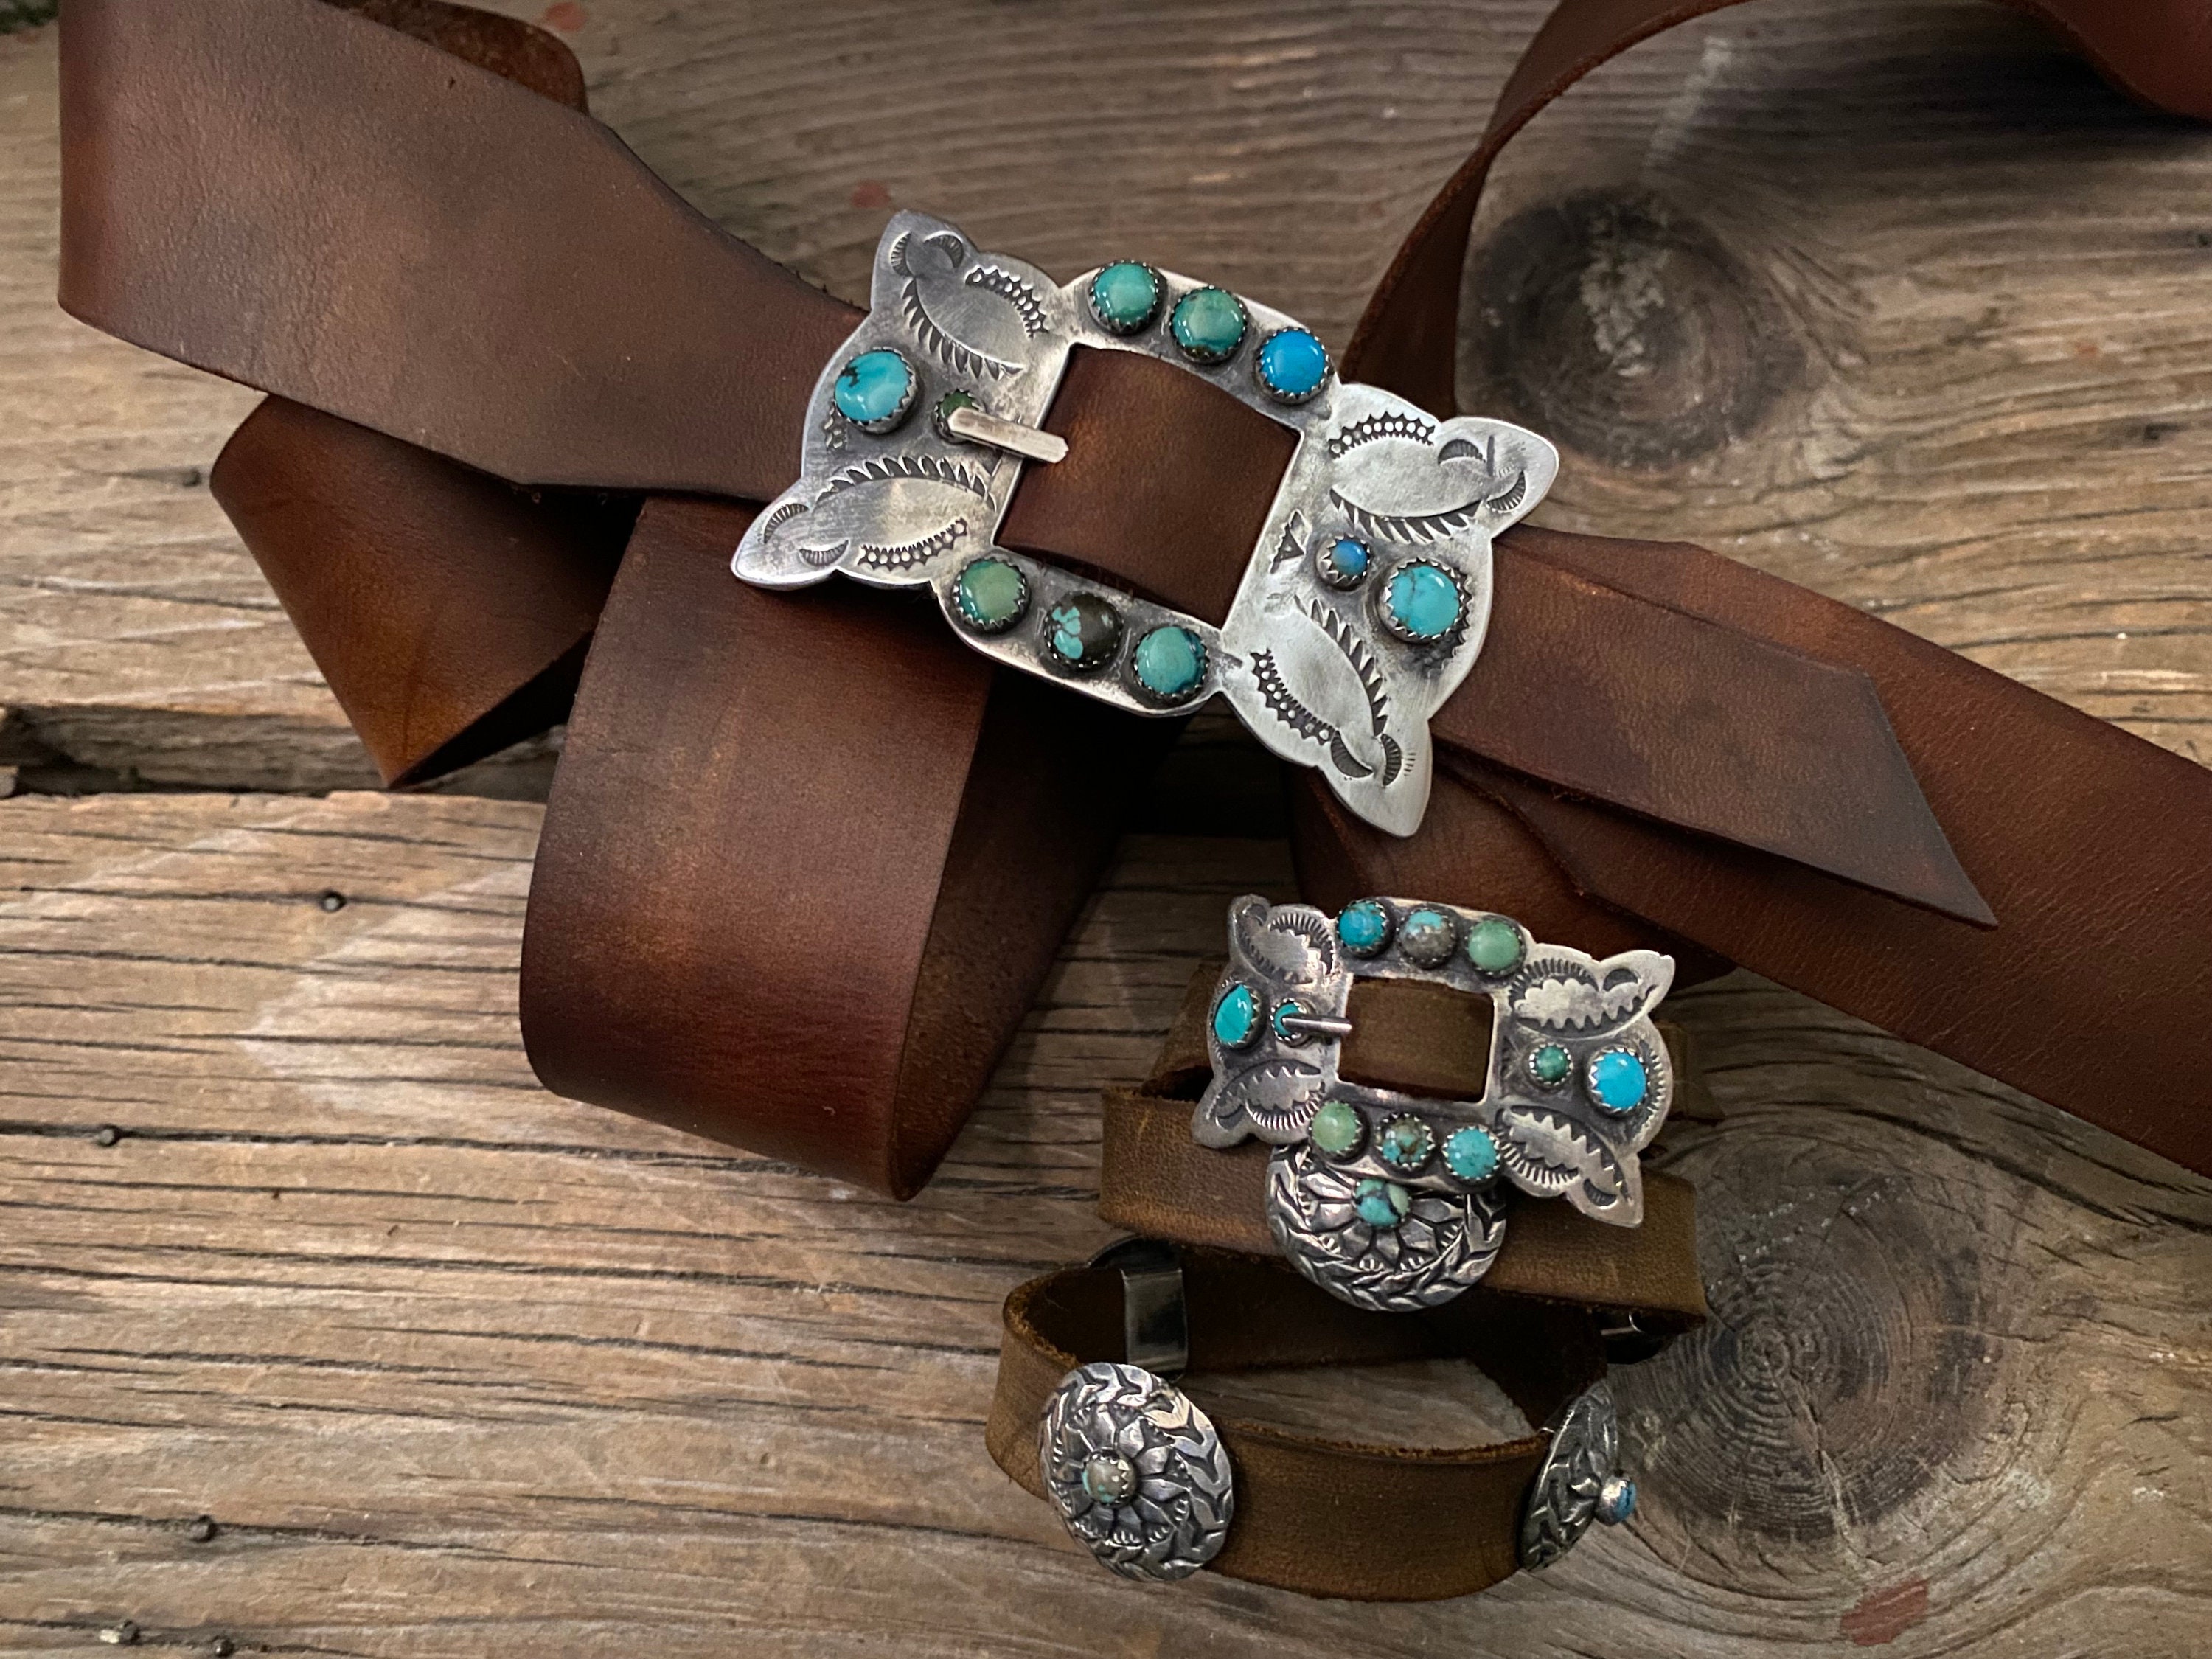 Hand Stamped Belt Buckle Handmade for RRL 1980's Old Turquoise Stones ...